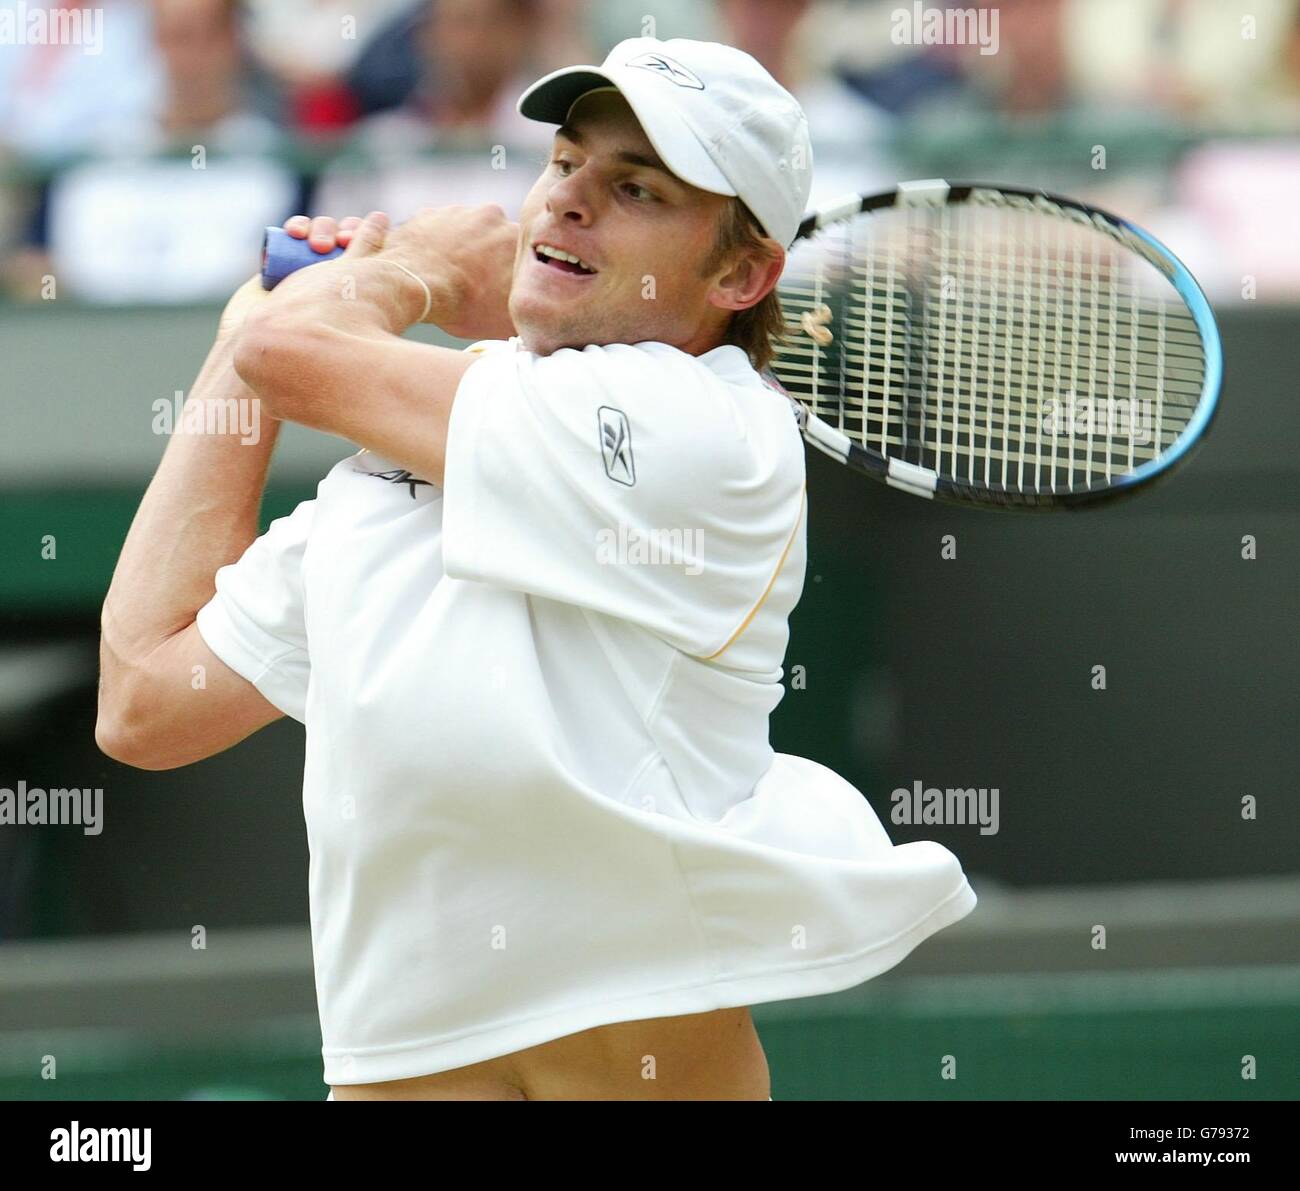 , NO MOBILE PHONE USE. Andy Roddick from the USA in action against Jonas Bjorkman from Sweden during their quarter-final match at the All England Lawn Tennis Championships at Wimbledon. Stock Photo